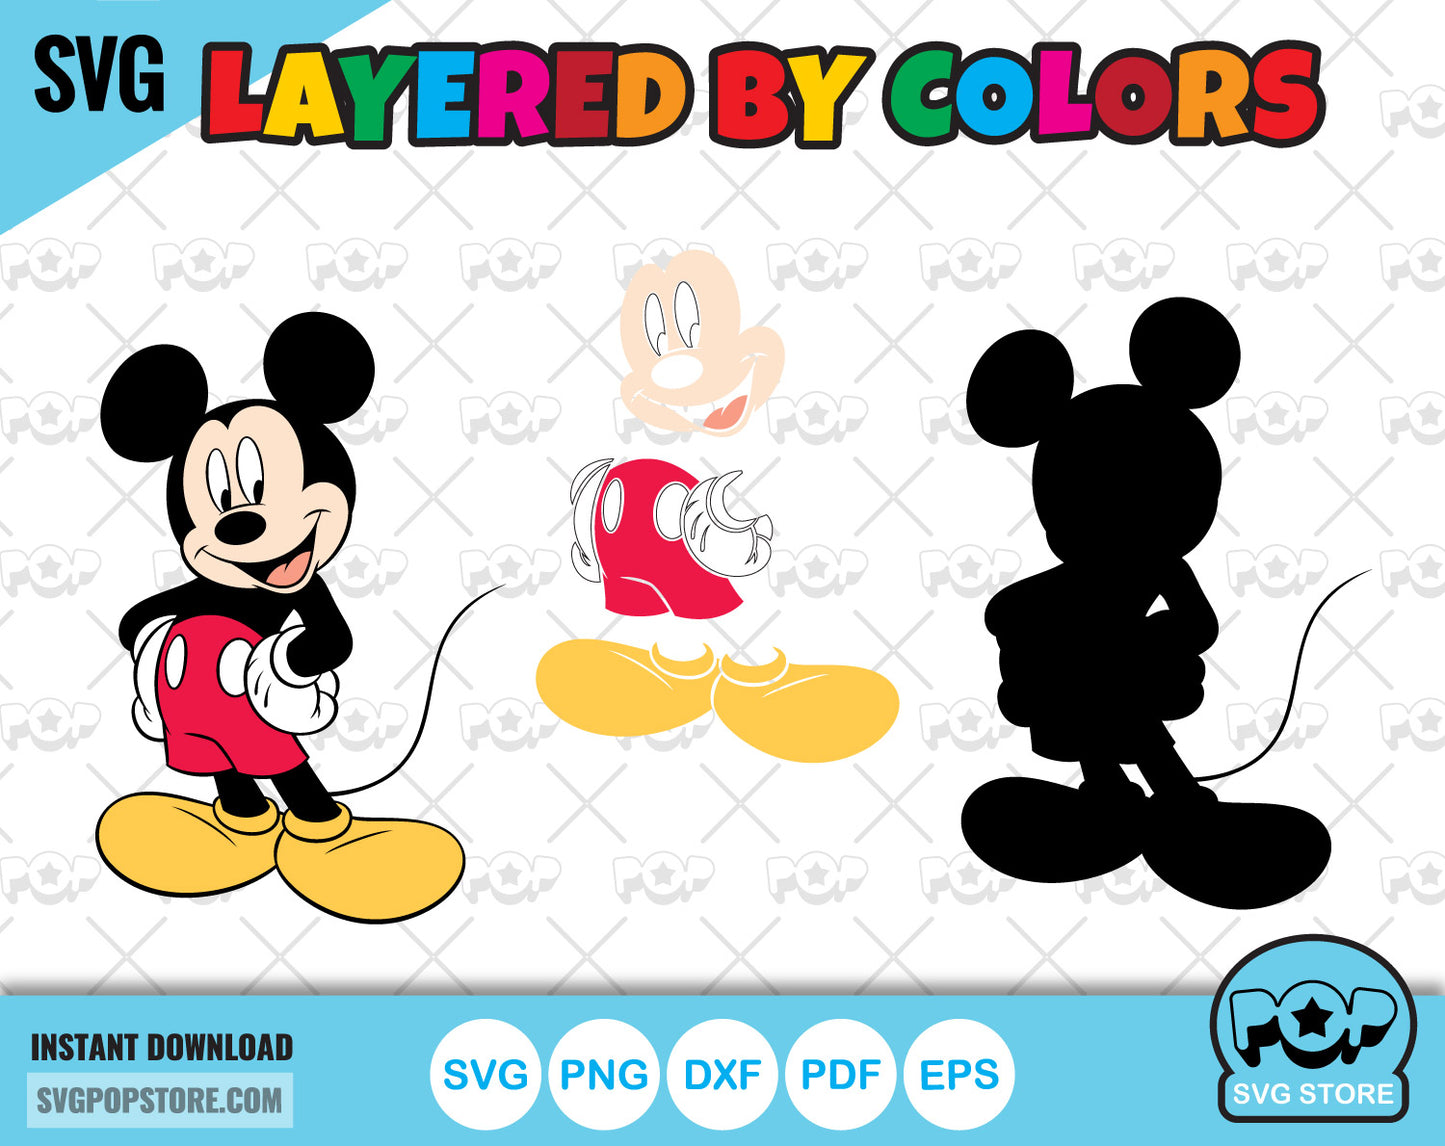 Mickey and Friends clipart set, svg cutting files for cricut silhouette, SVG, PNG, DXF, instant download